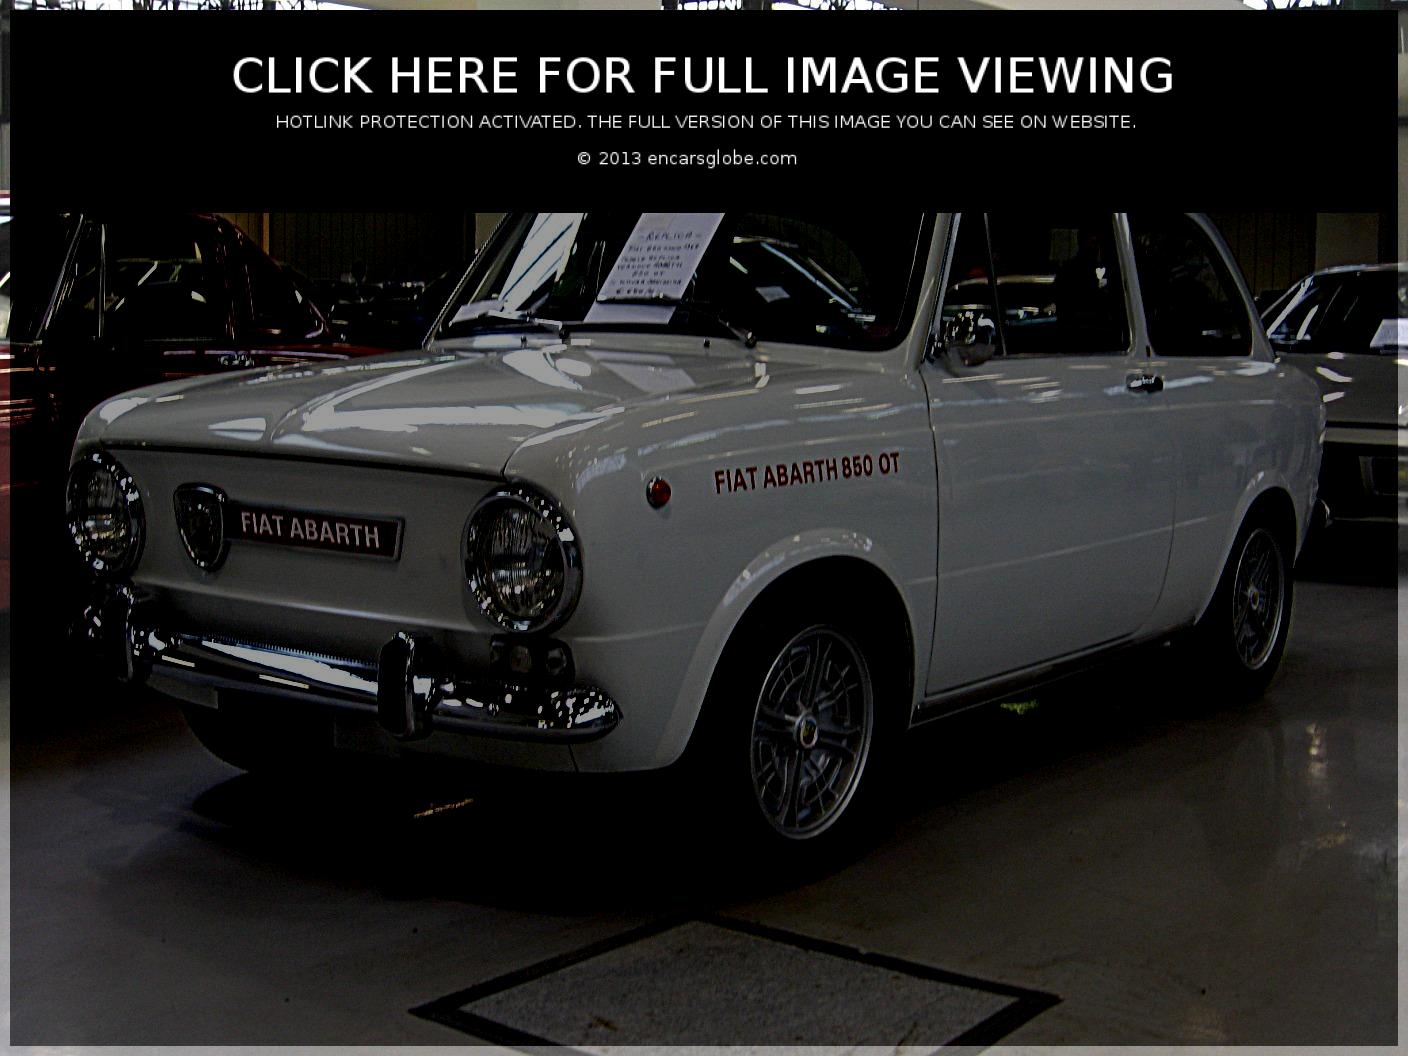 Abarth 850 OT: Photo gallery, complete information about model ...